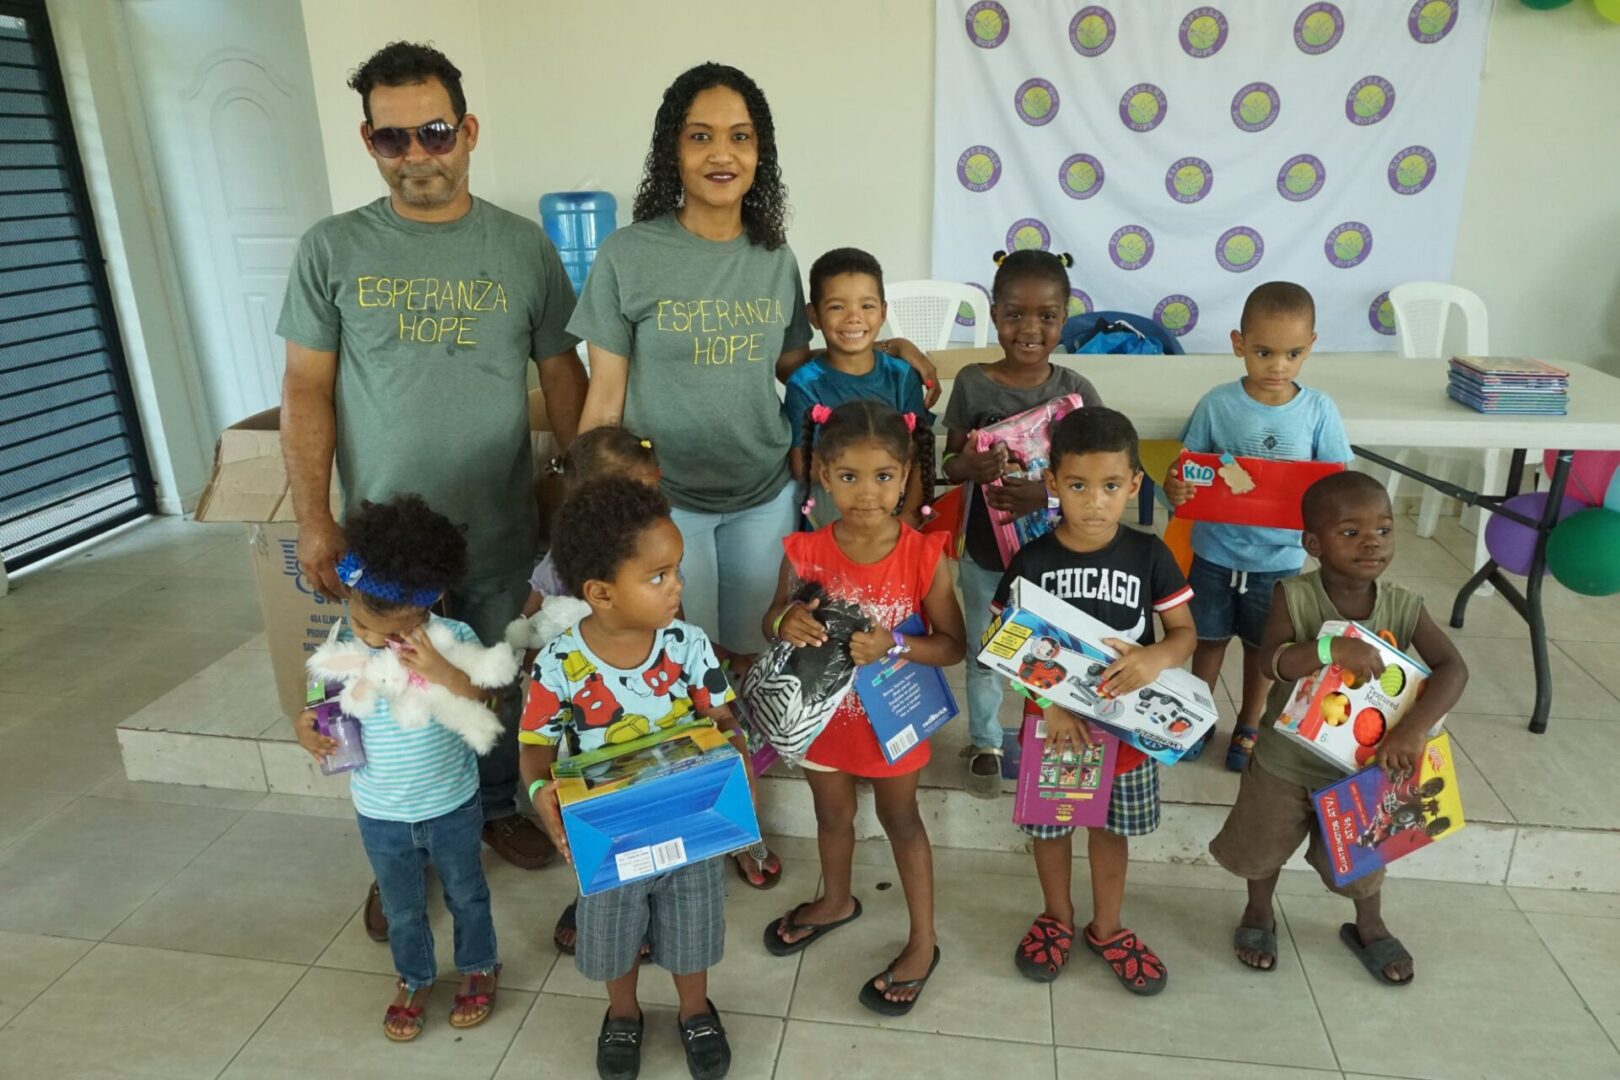 A male and female staff together with the group of young girls and boys who received toys, close-up